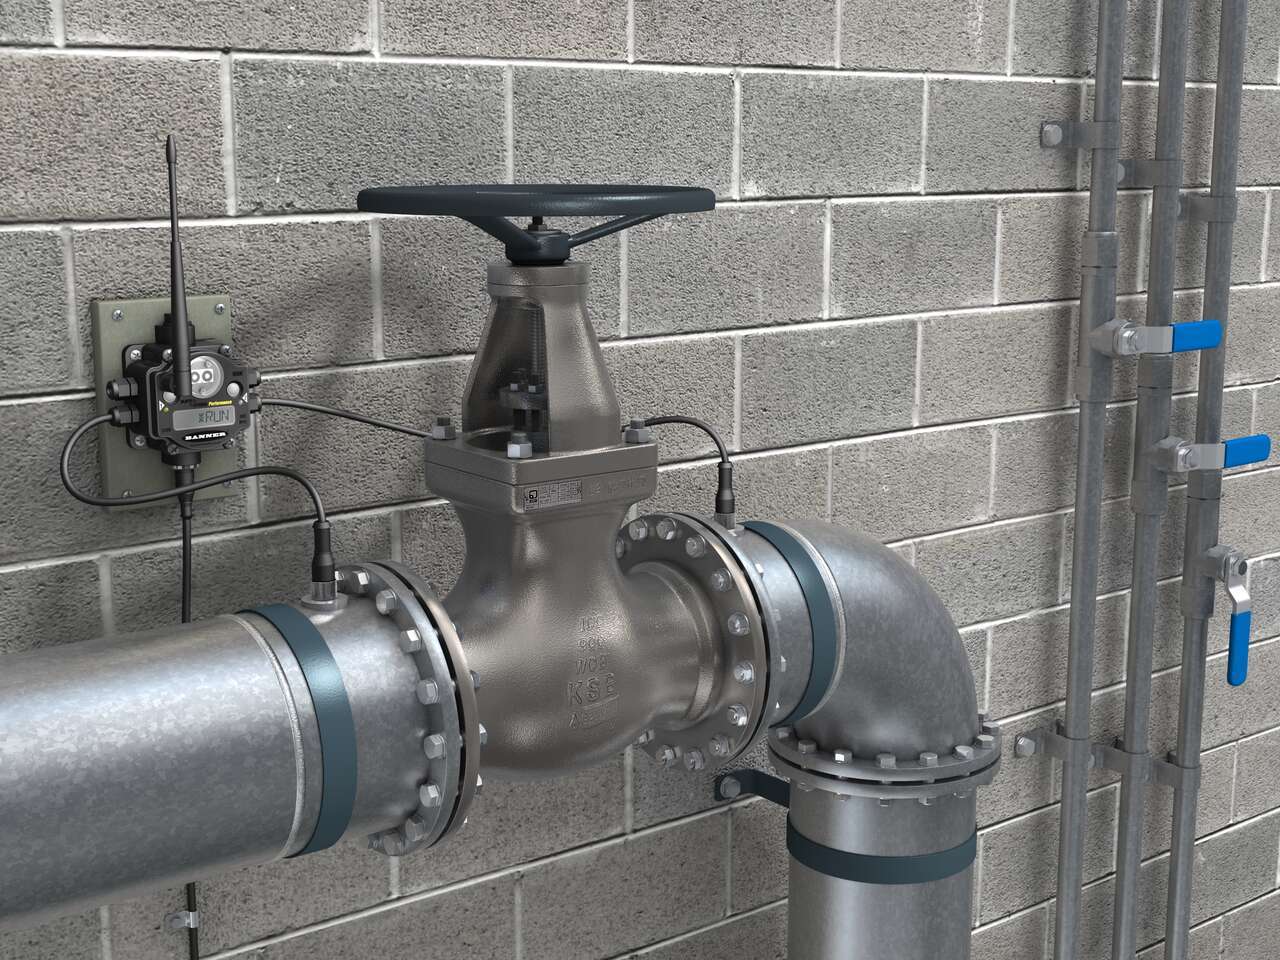 Valve Temperature Monitoring at a Steam Power Plant